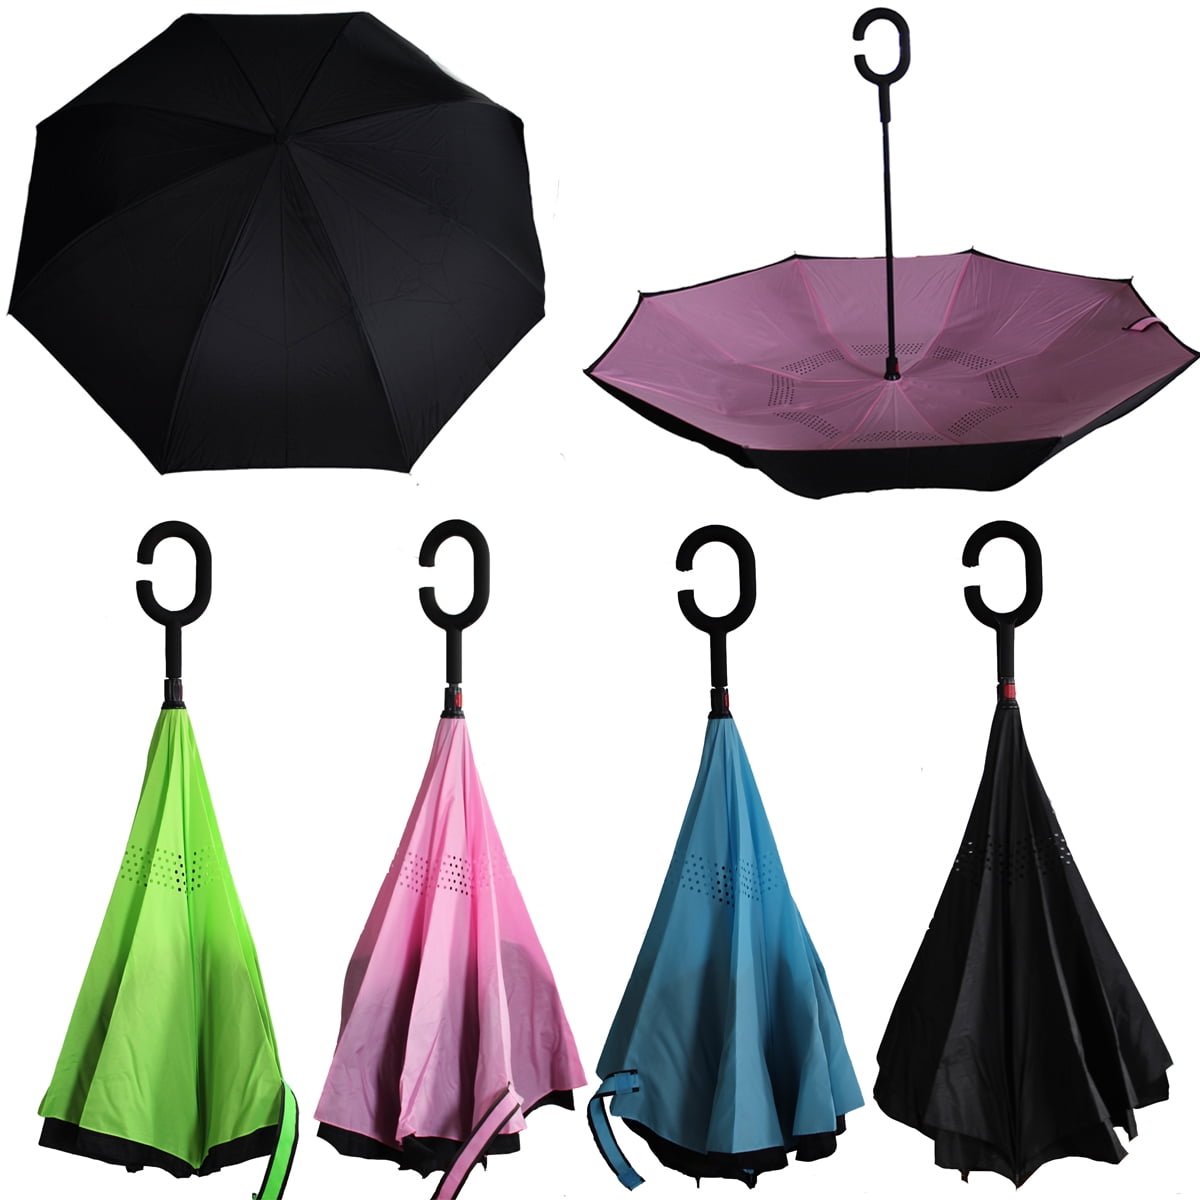 Double Layer Inverted Inverted Umbrella Is Light And Sturdy Texture Blue Mint Leaves Mint Reverse Umbrella And Windproof Umbrella Edge Night Reflecti